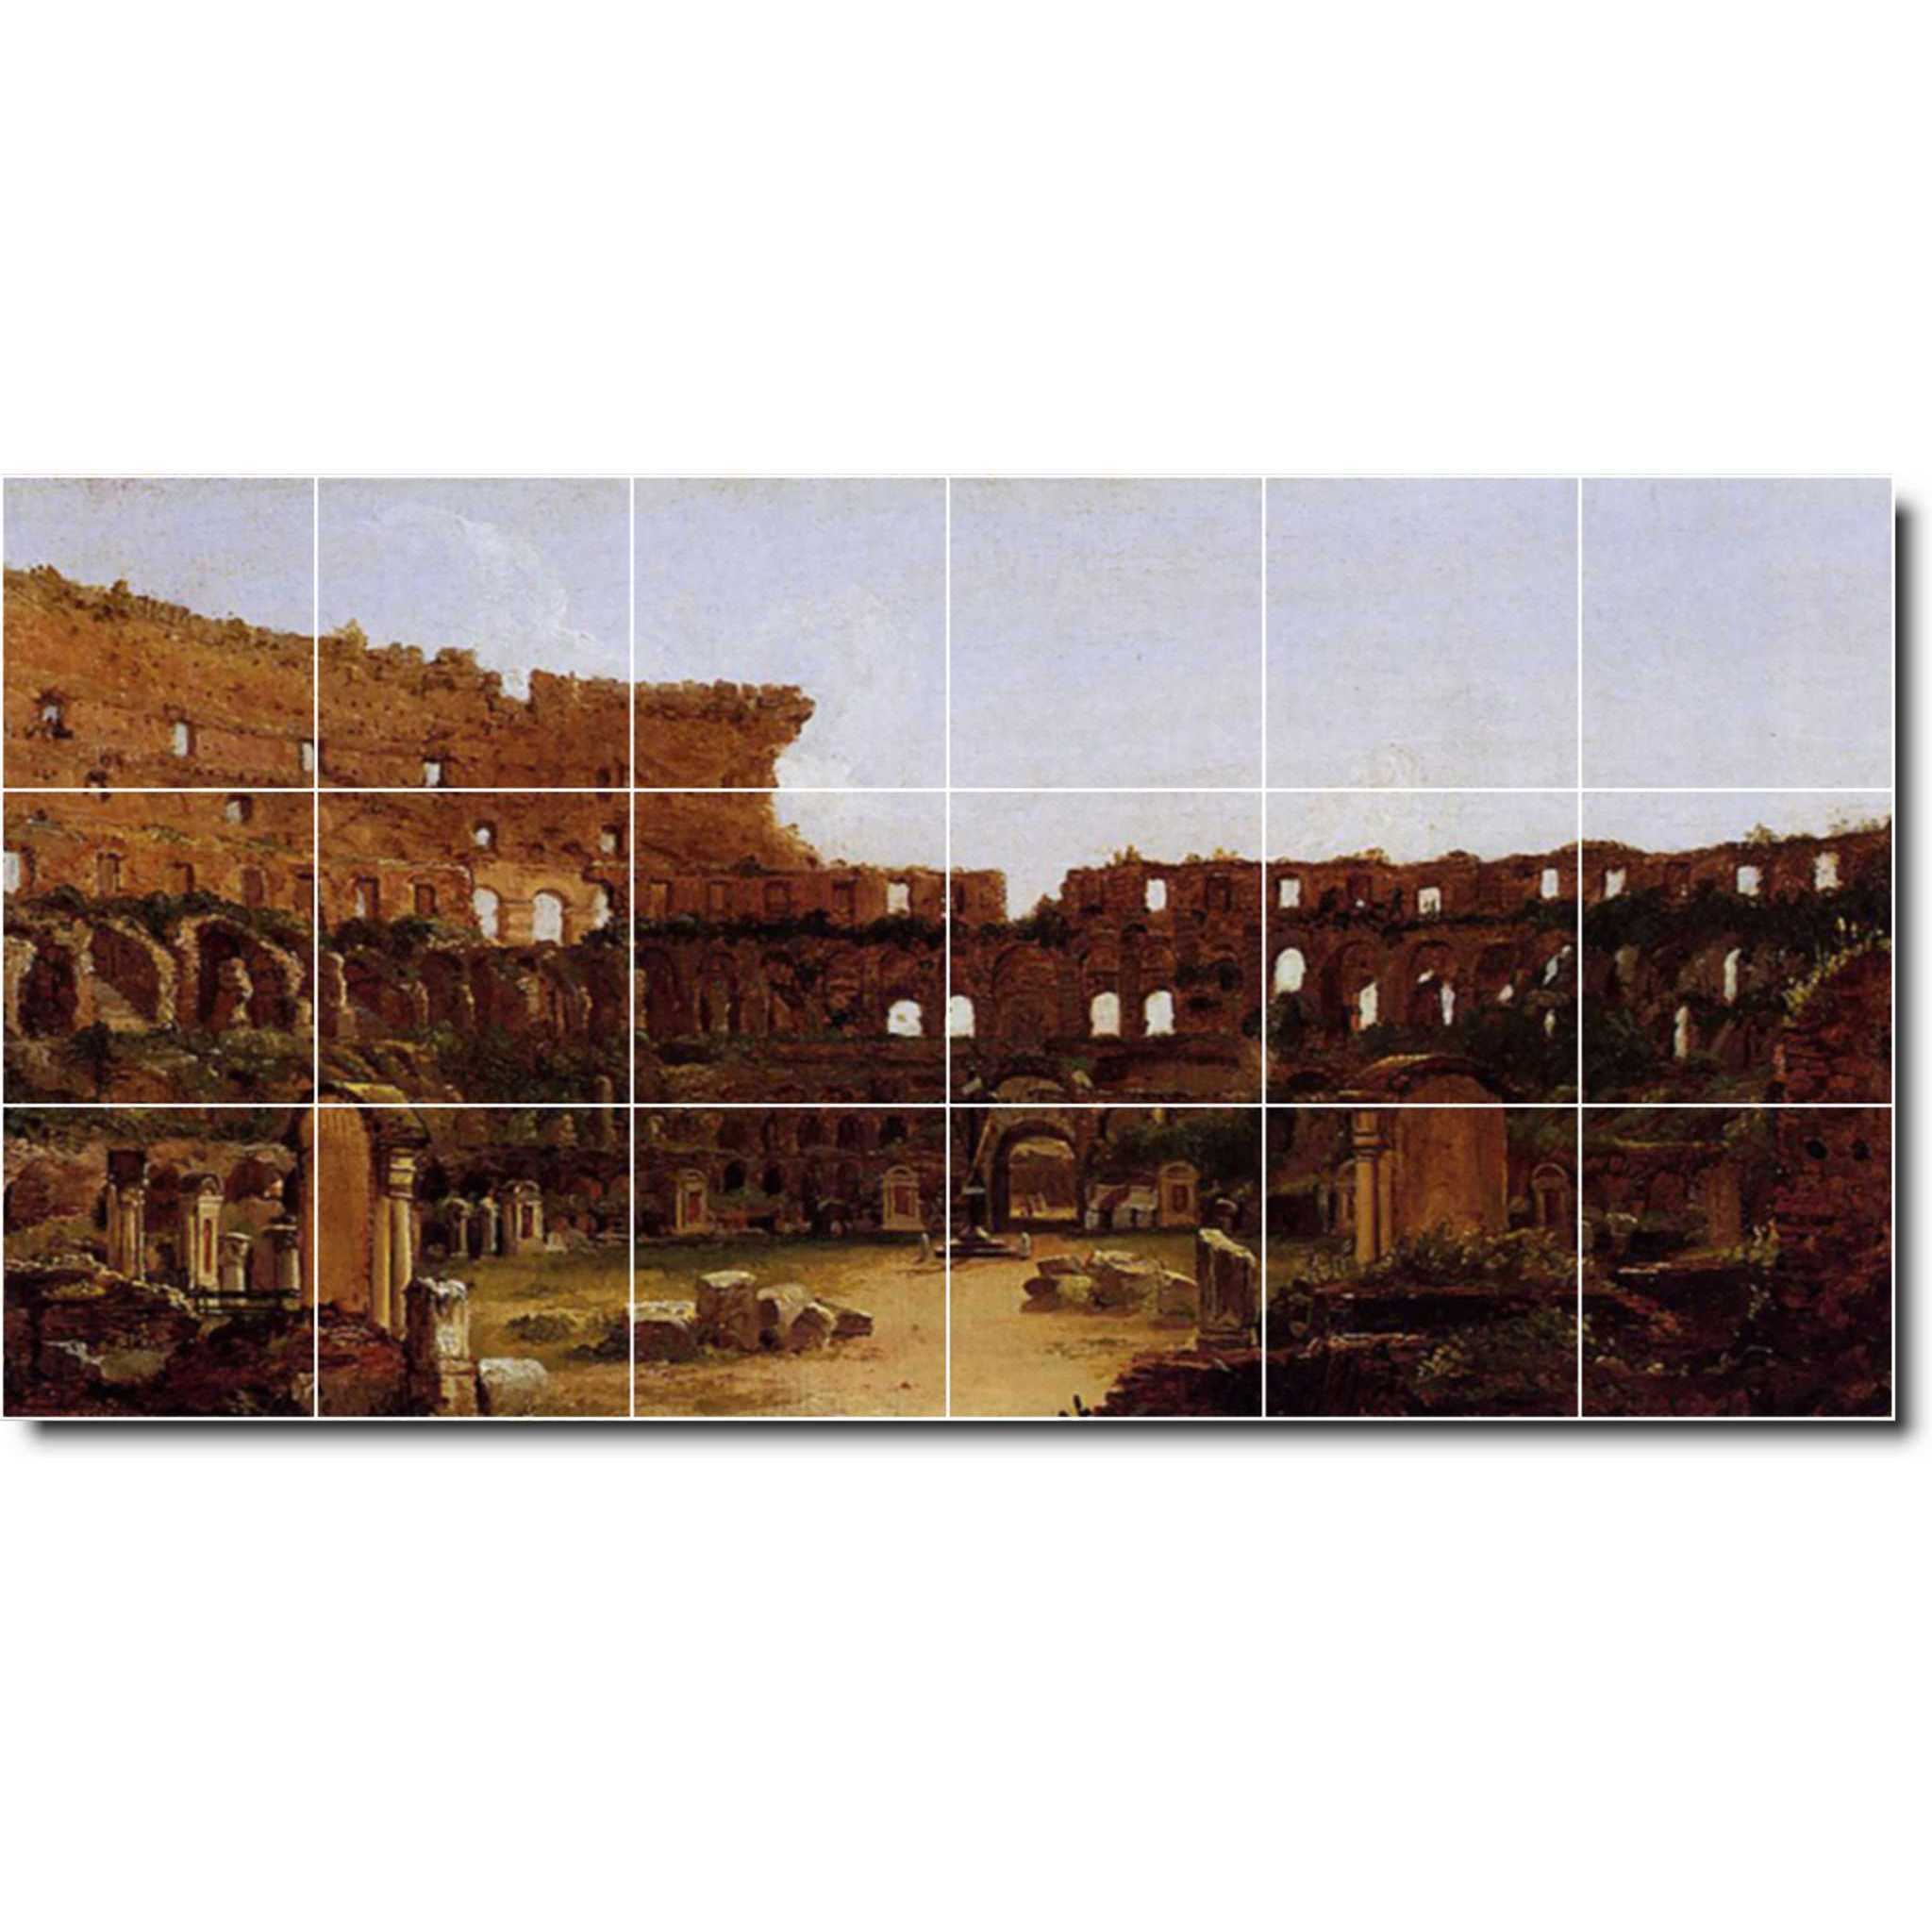 thomas cole historical painting ceramic tile mural p01831